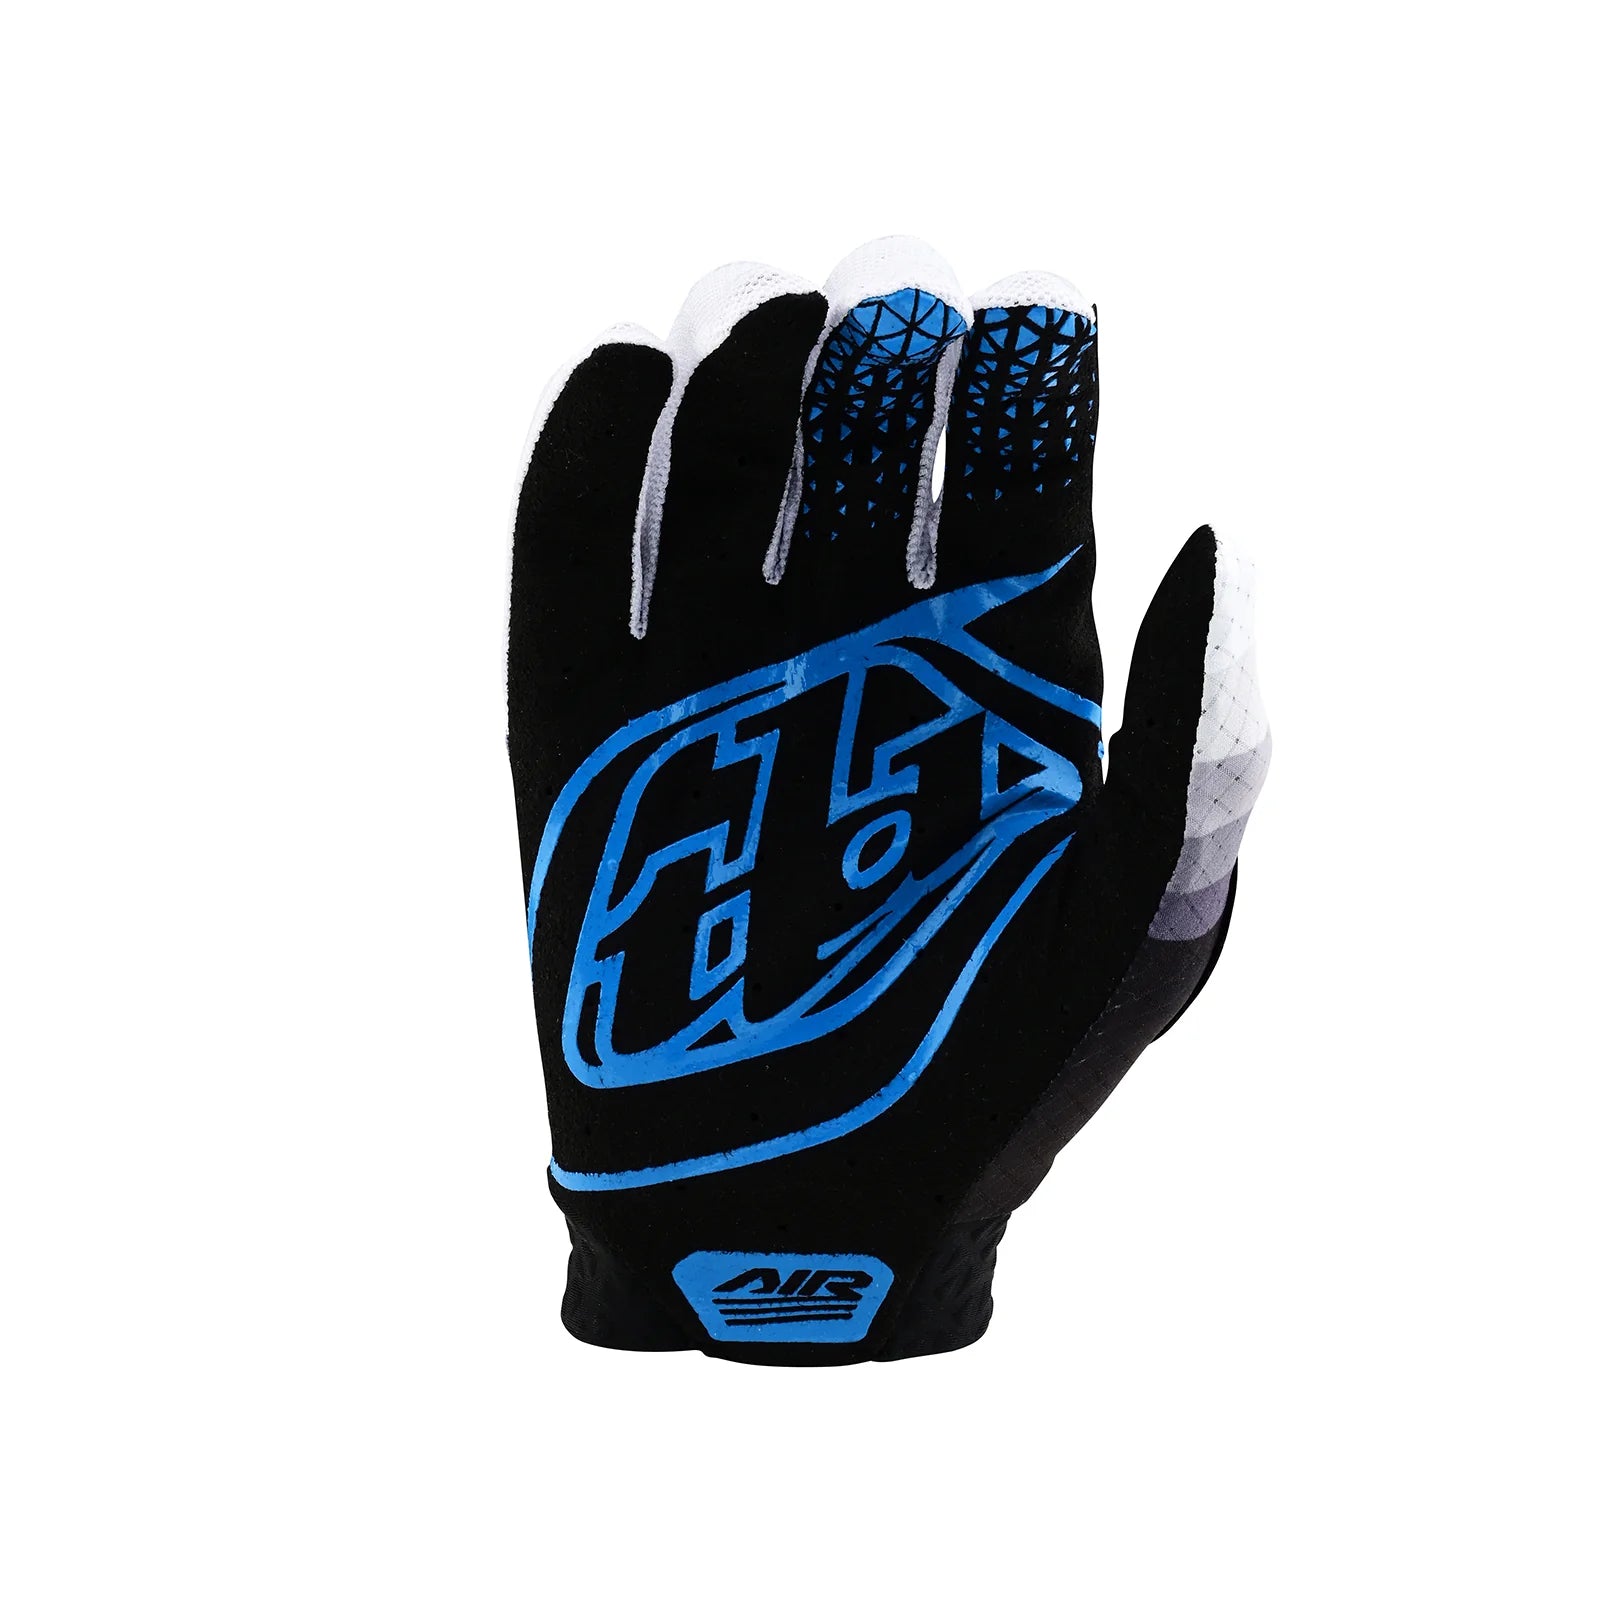 TLD Air Glove Wavez Reverb Black Blue and blue motocross glove with a single-layer perforated palm, white accents, and logo.